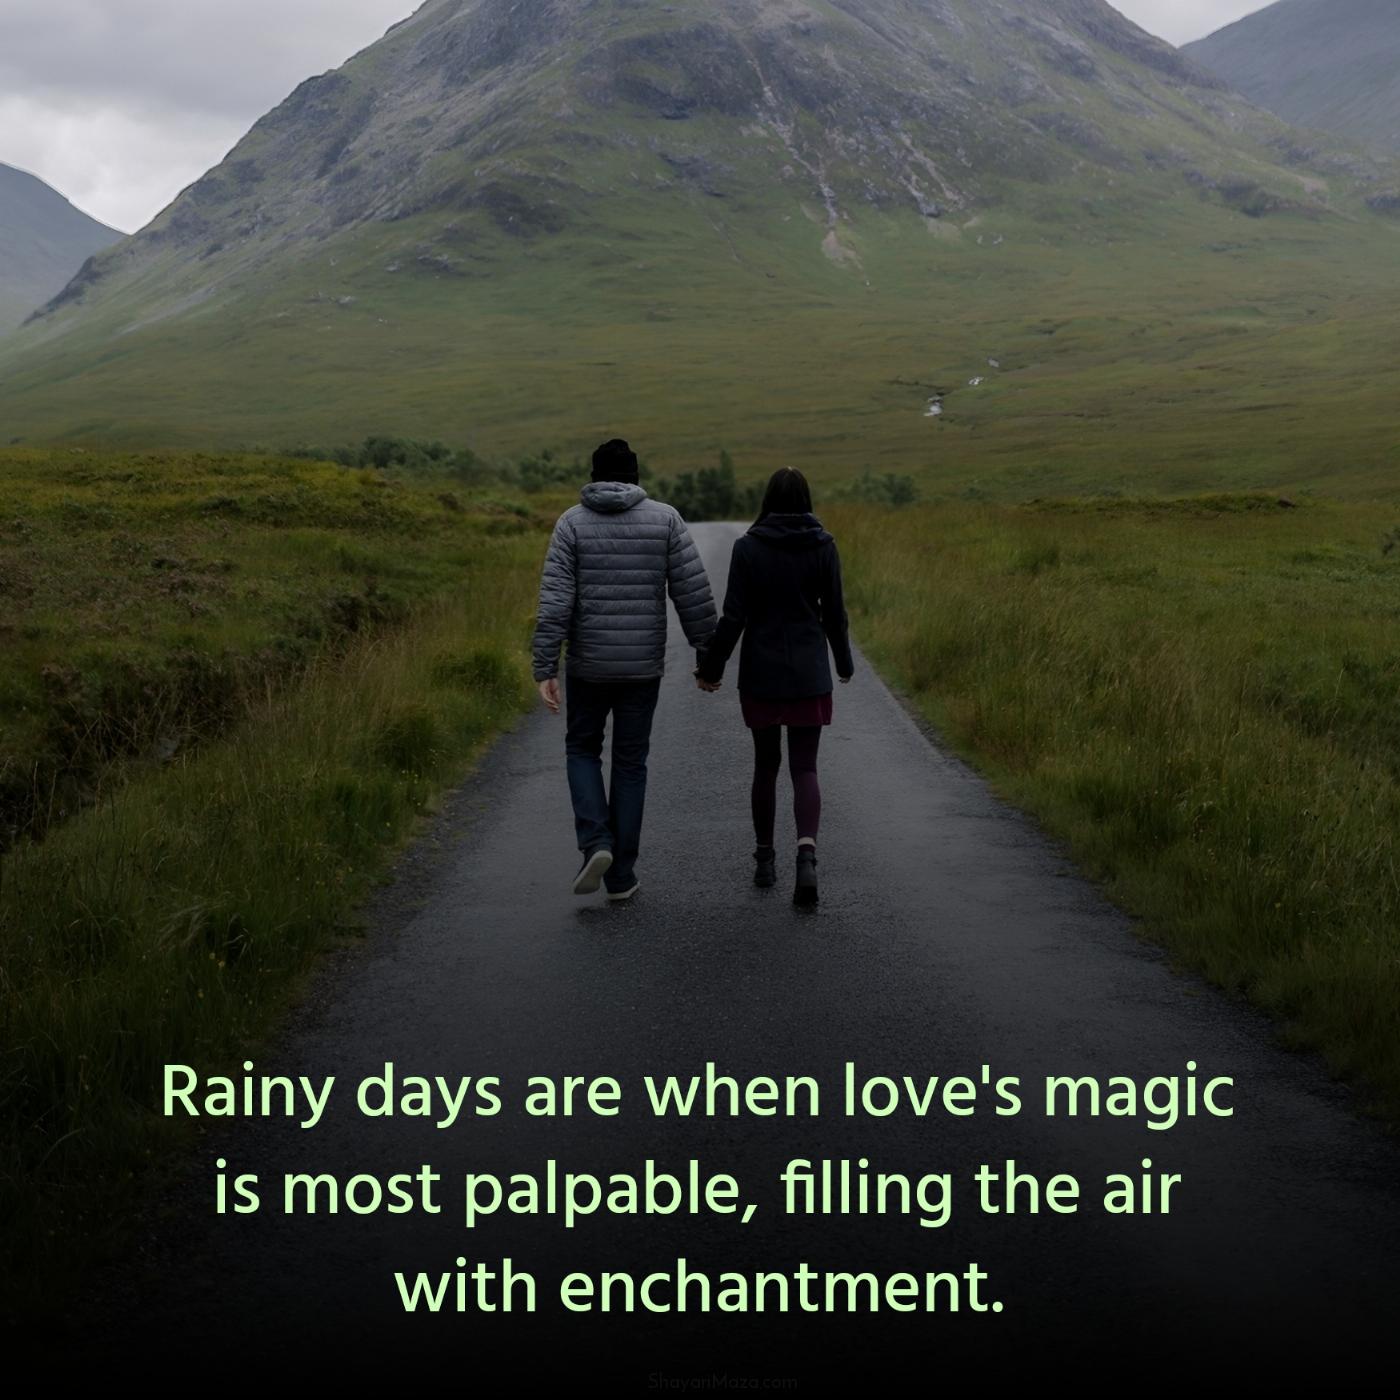 Rainy days are when love's magic is most palpable